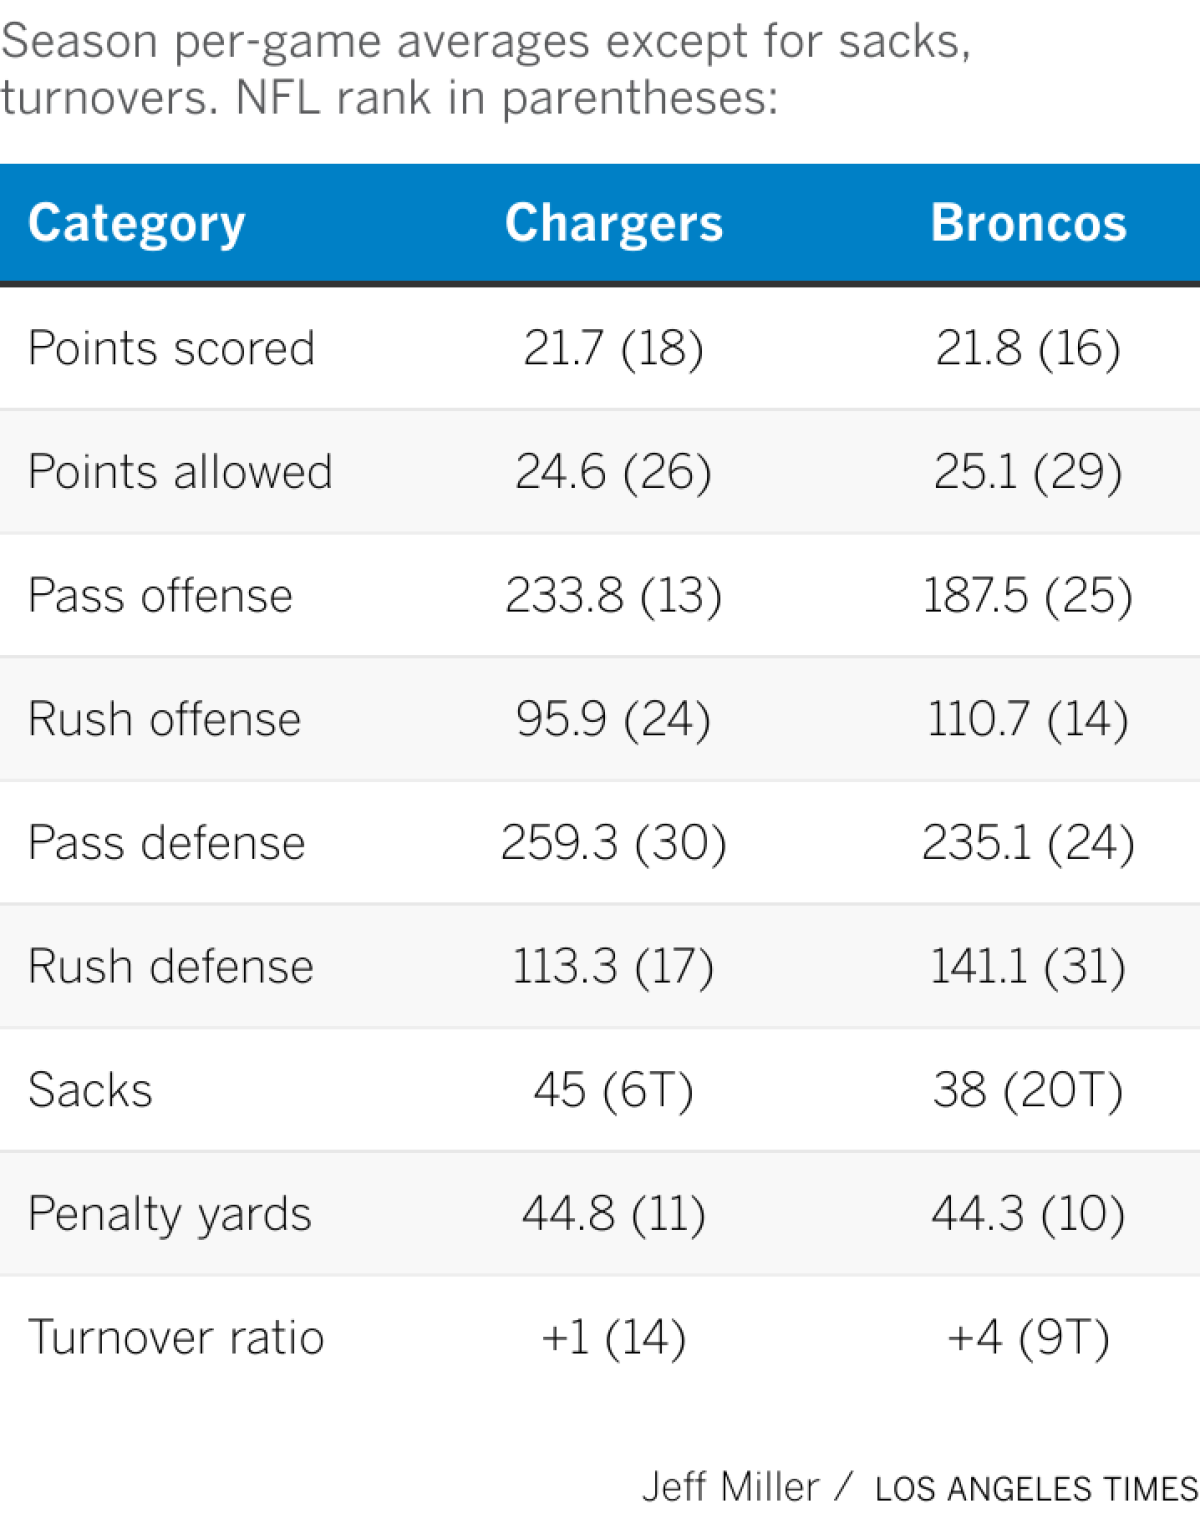 A chart comparing season stats for the Chargers and Broncos.